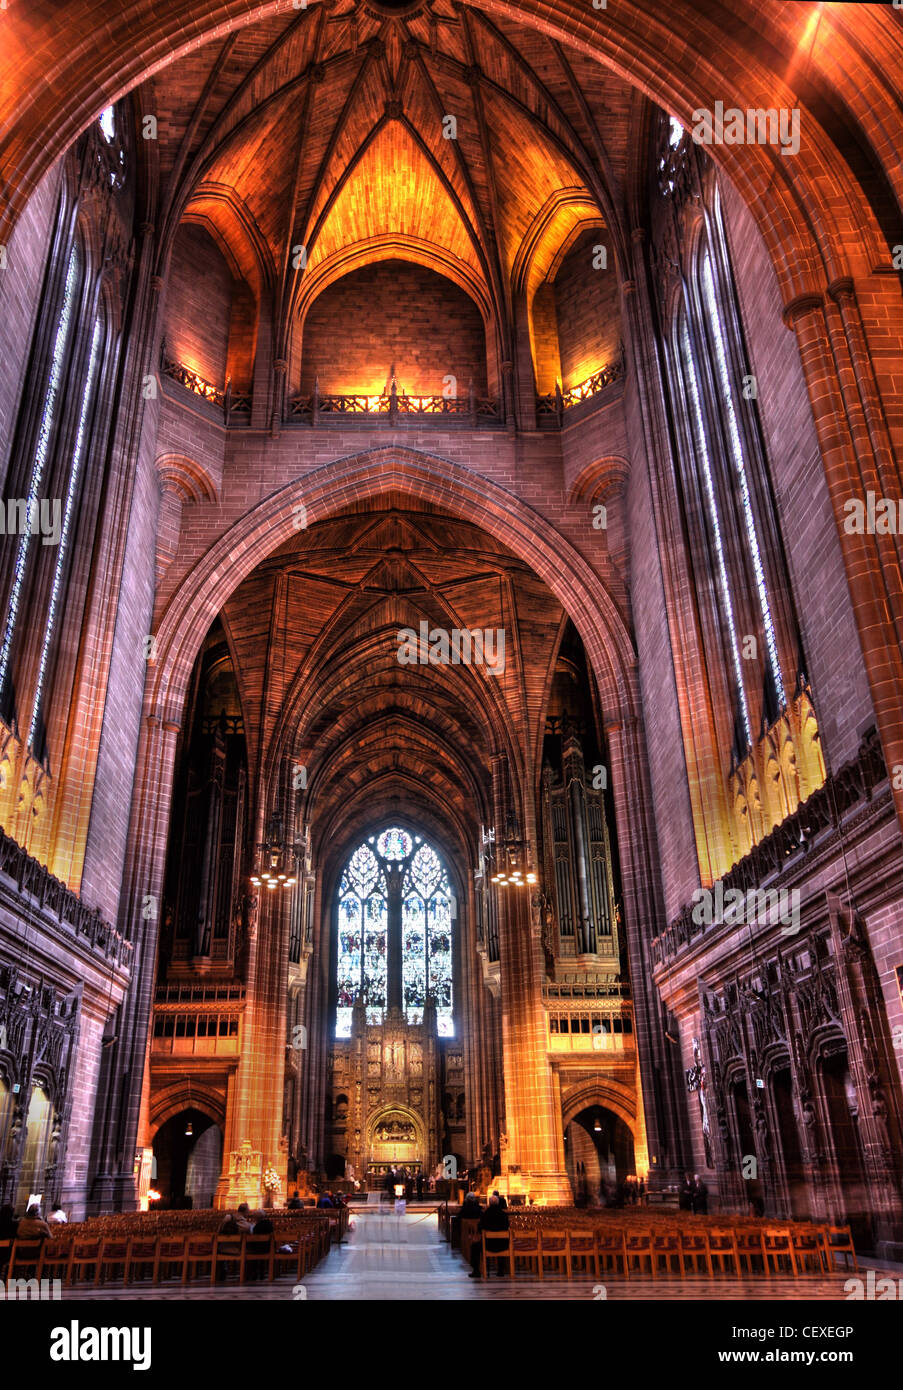 Liverpool Anglican Cathedral interior looking west, St James Mt, St James Rd, Liverpool, Merseyside, England, UK, L1 7AZ Stock Photo